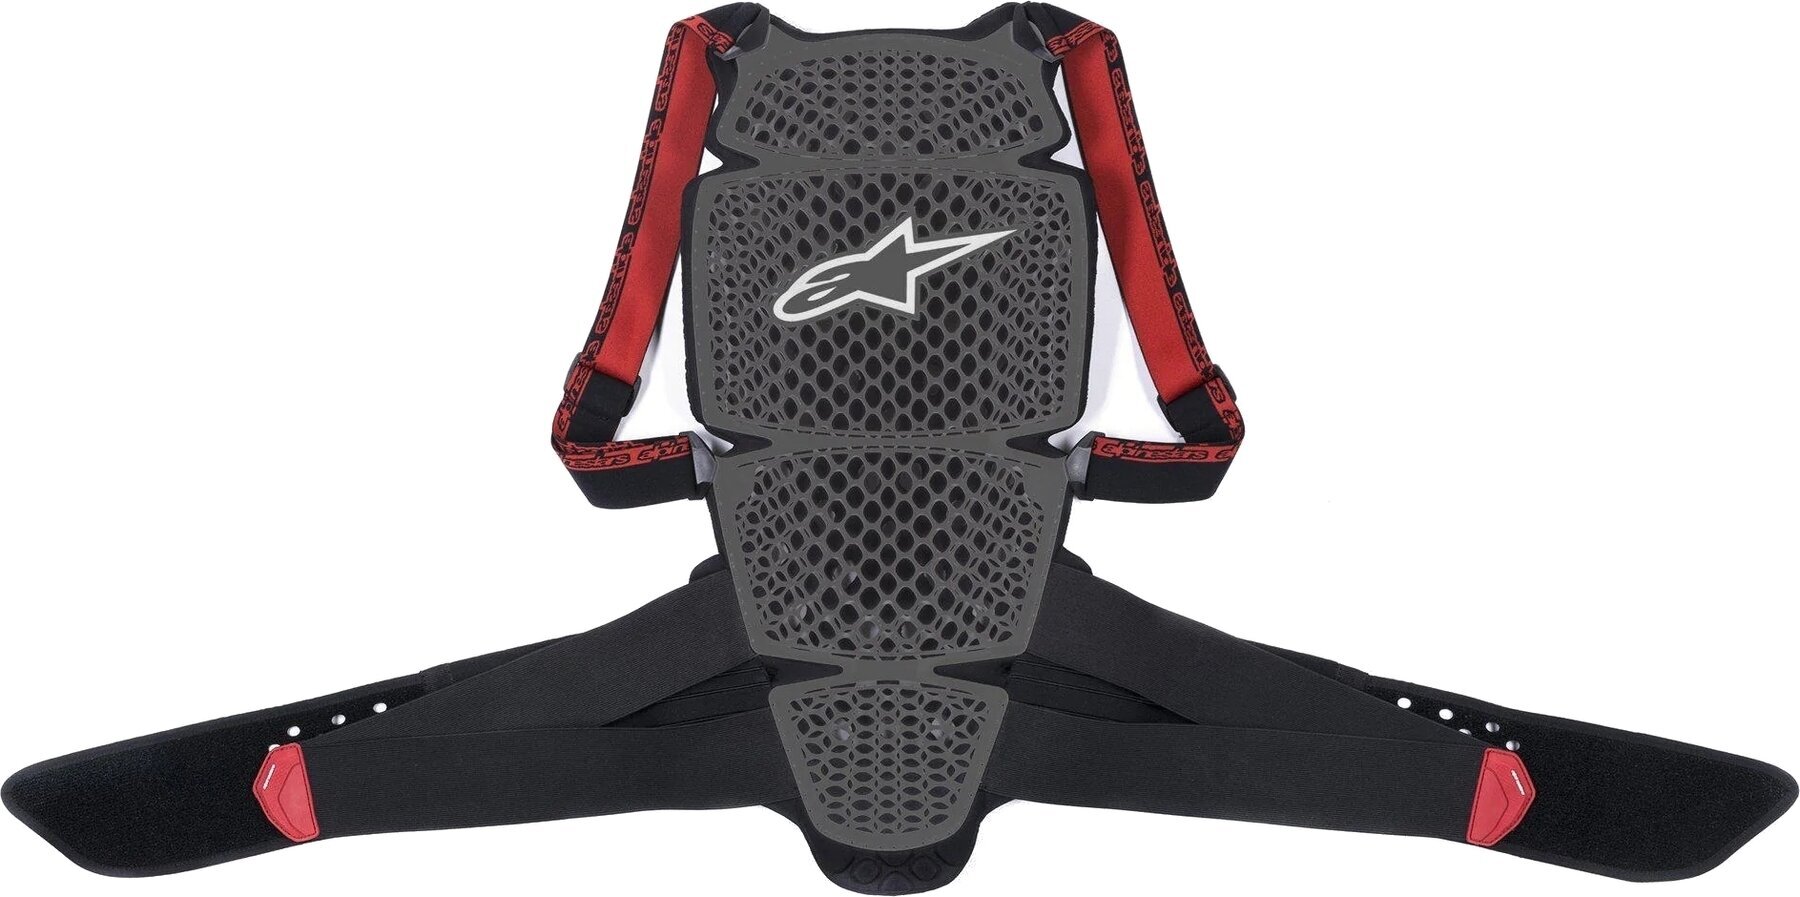 Back Protector Alpinestars Back Protector Nucleon KR-Cell Smoke Black/Red M